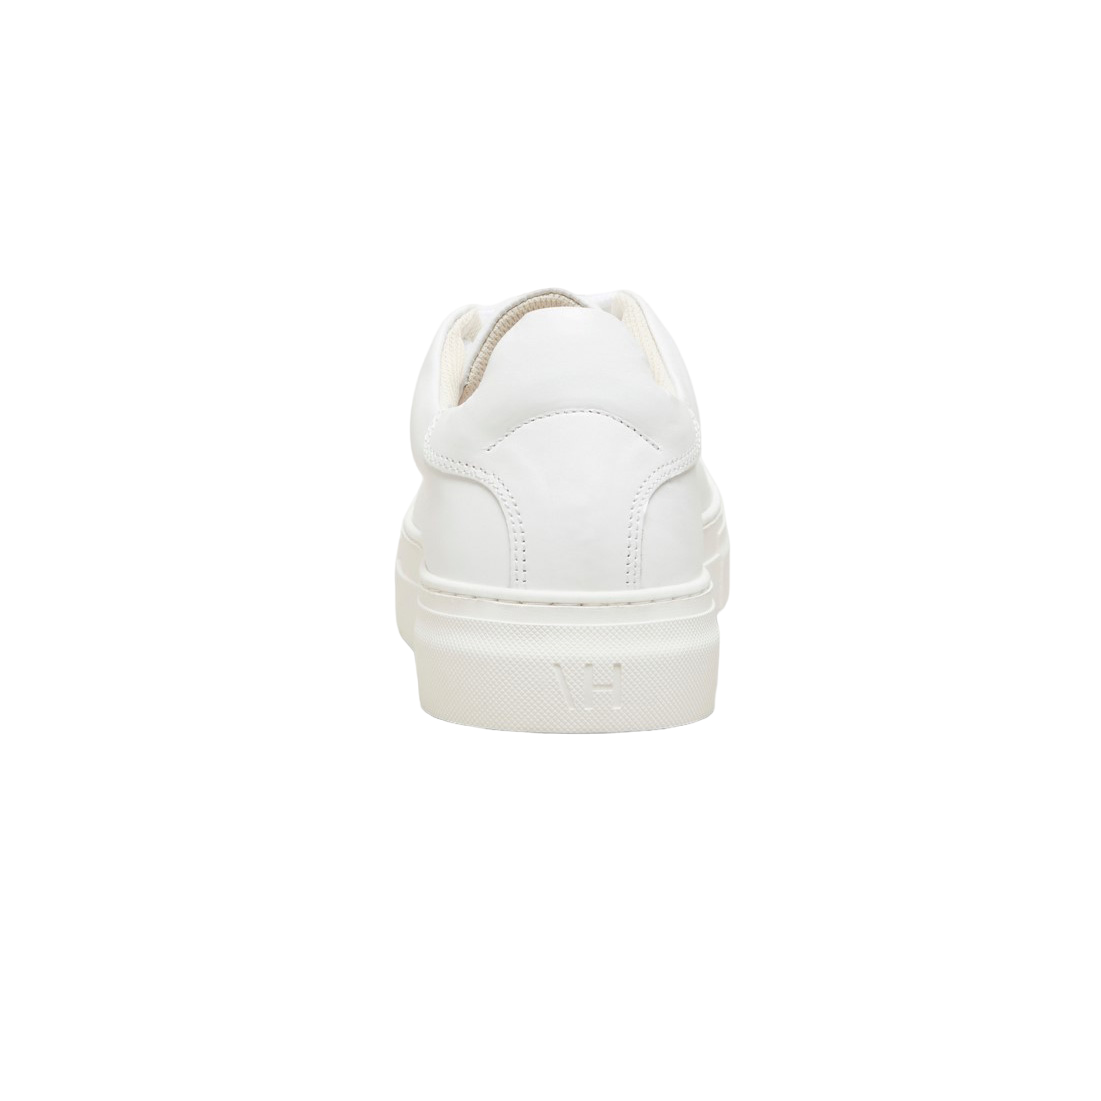 David Chunky Leather Trainer - White